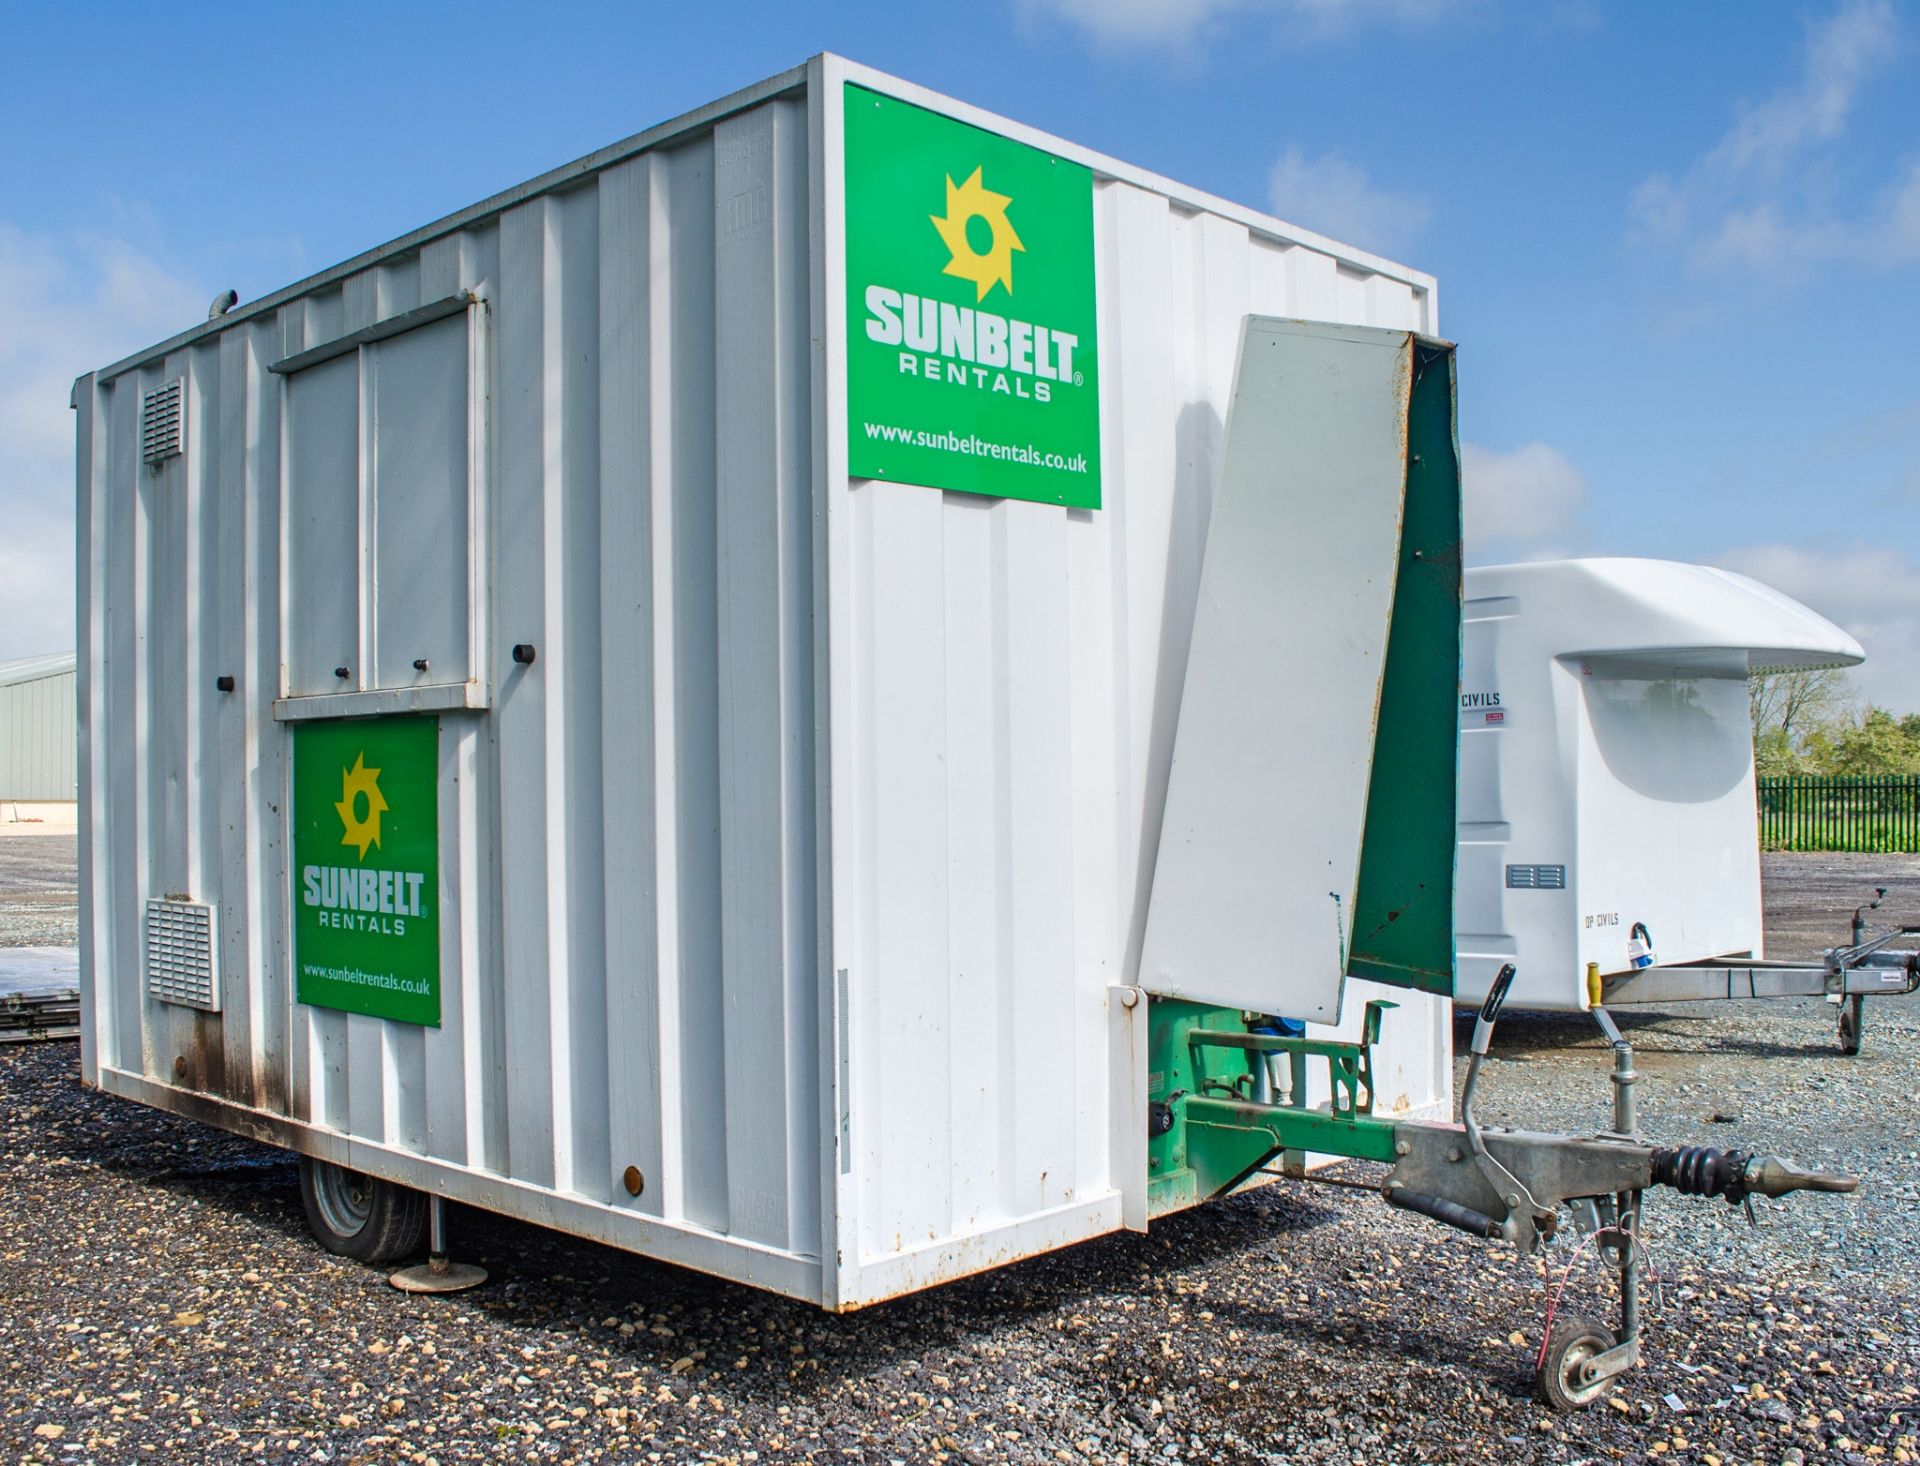 Groundhog 12 ft x 8 ft mobile welfare unit Comprising of: canteen area, toilet & generator room - Image 3 of 12